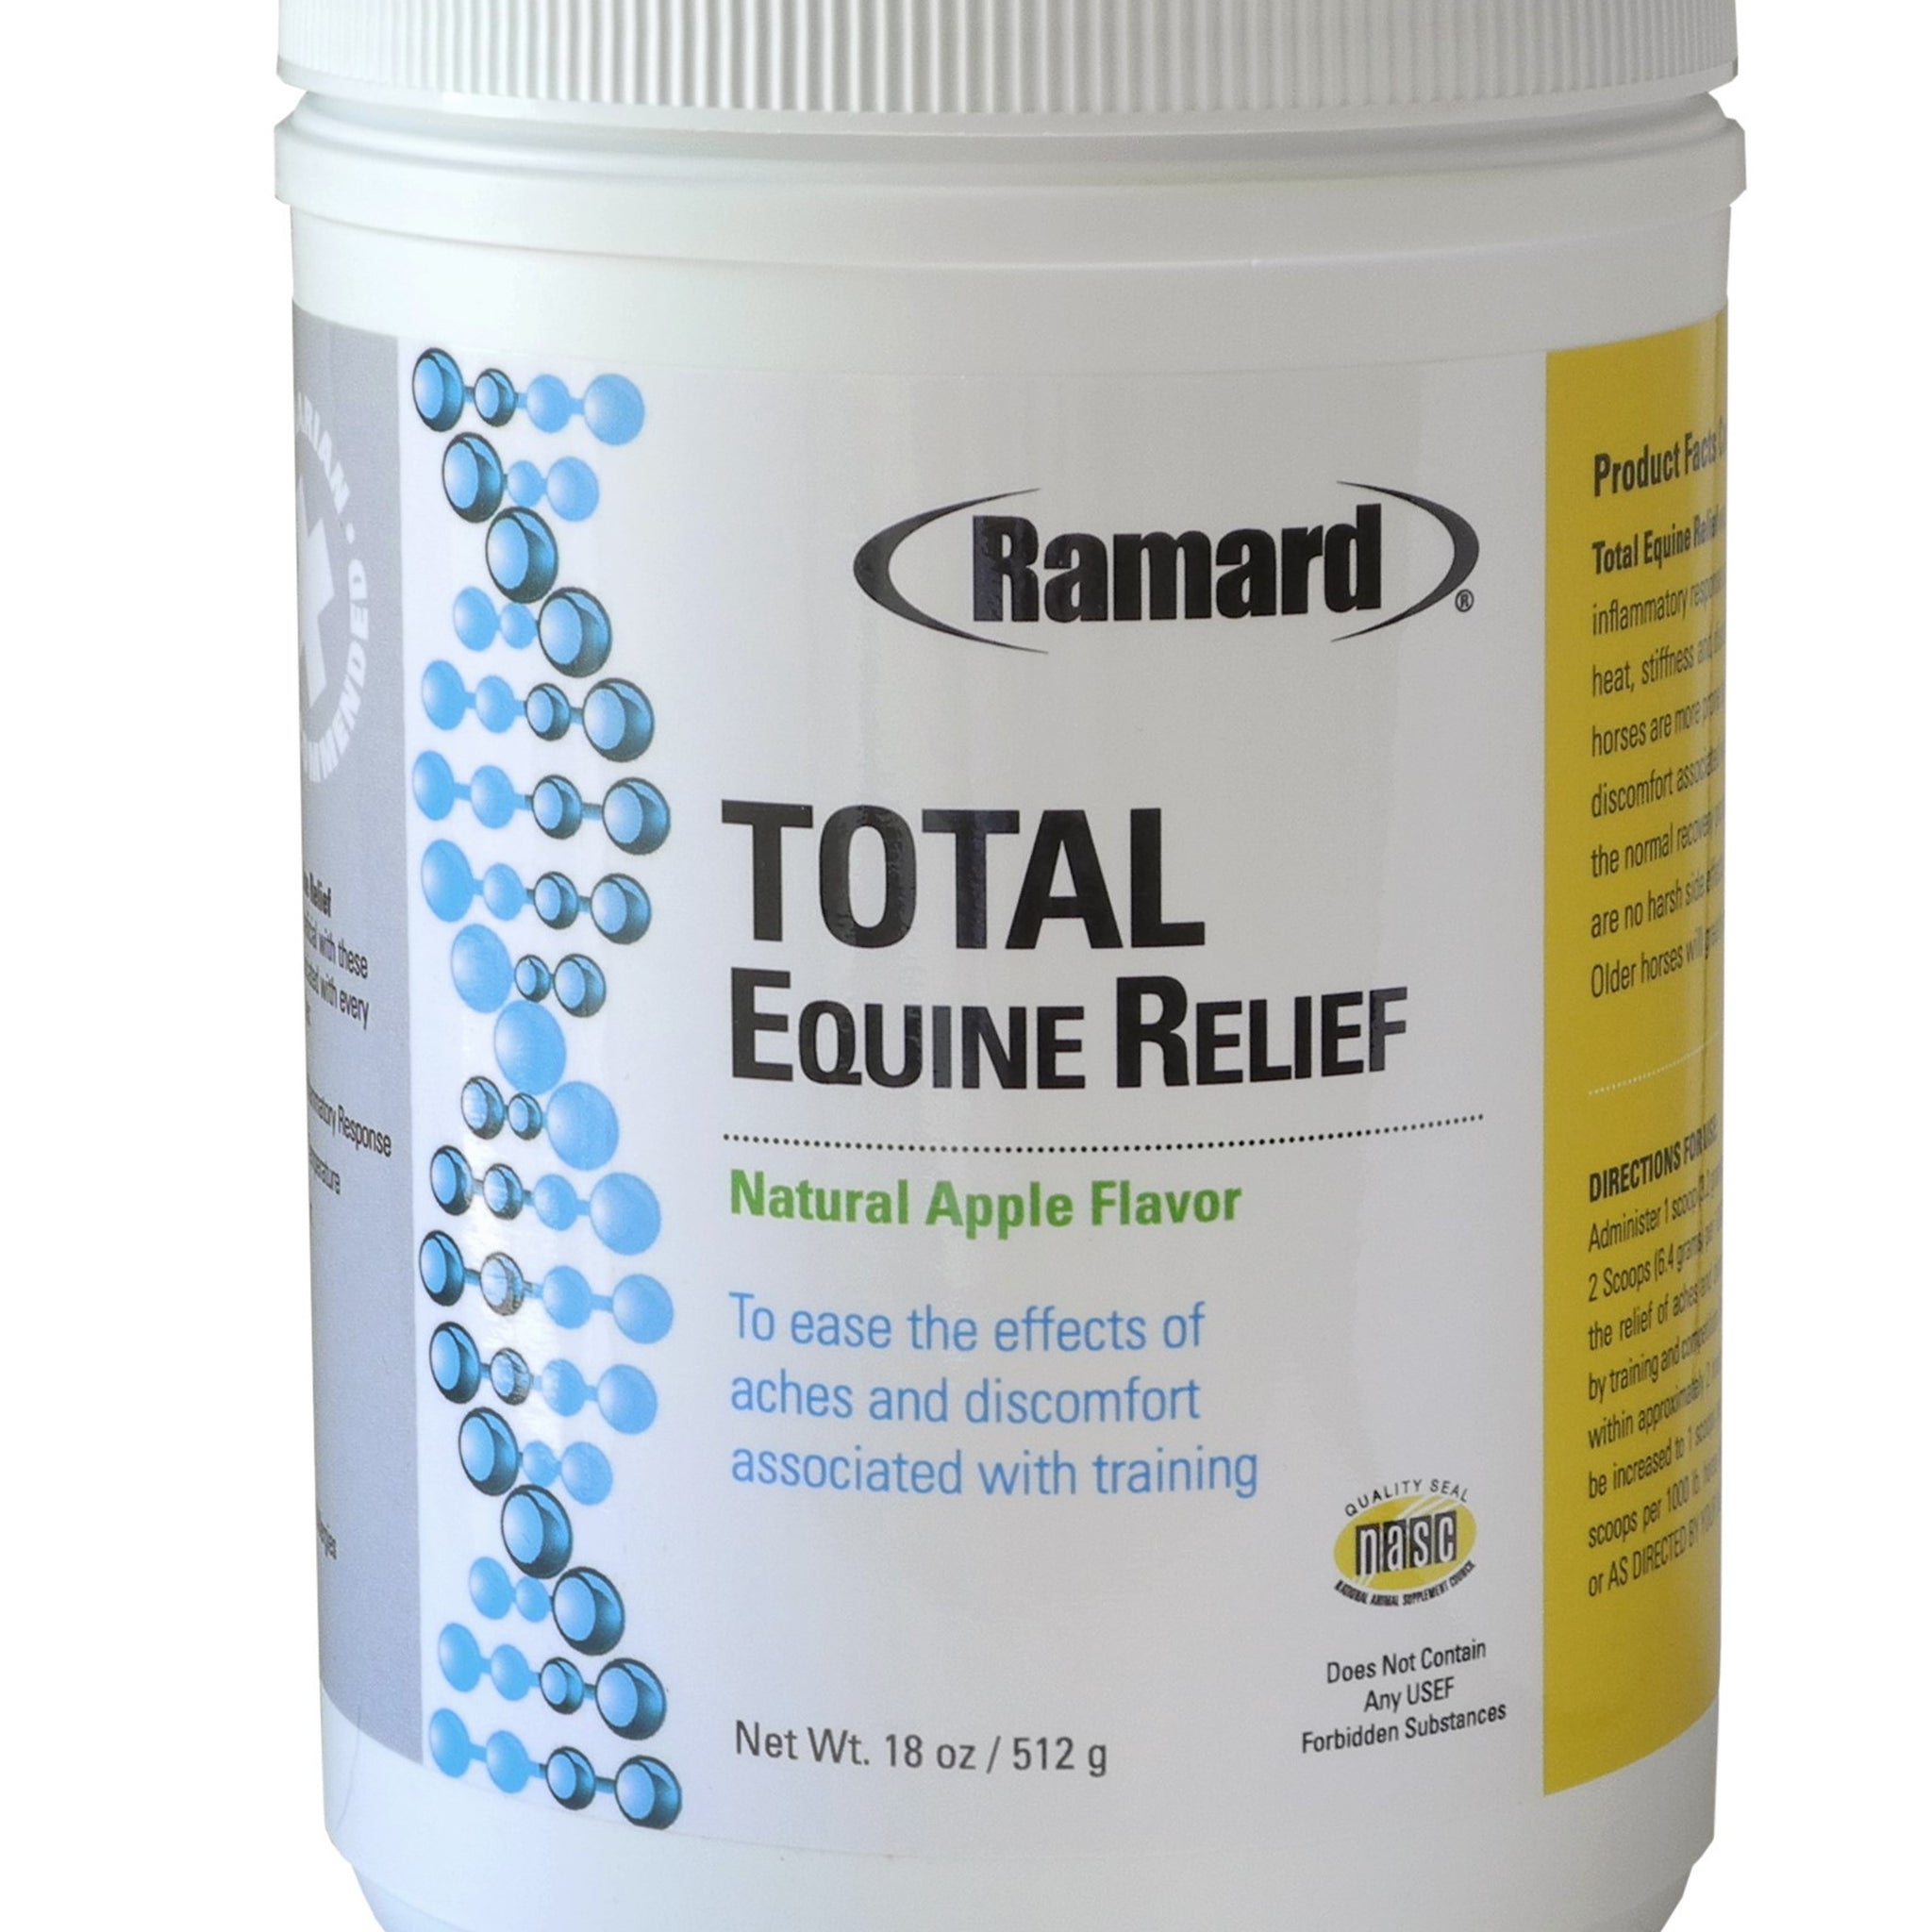 TOTAL EQUINE RELIEF